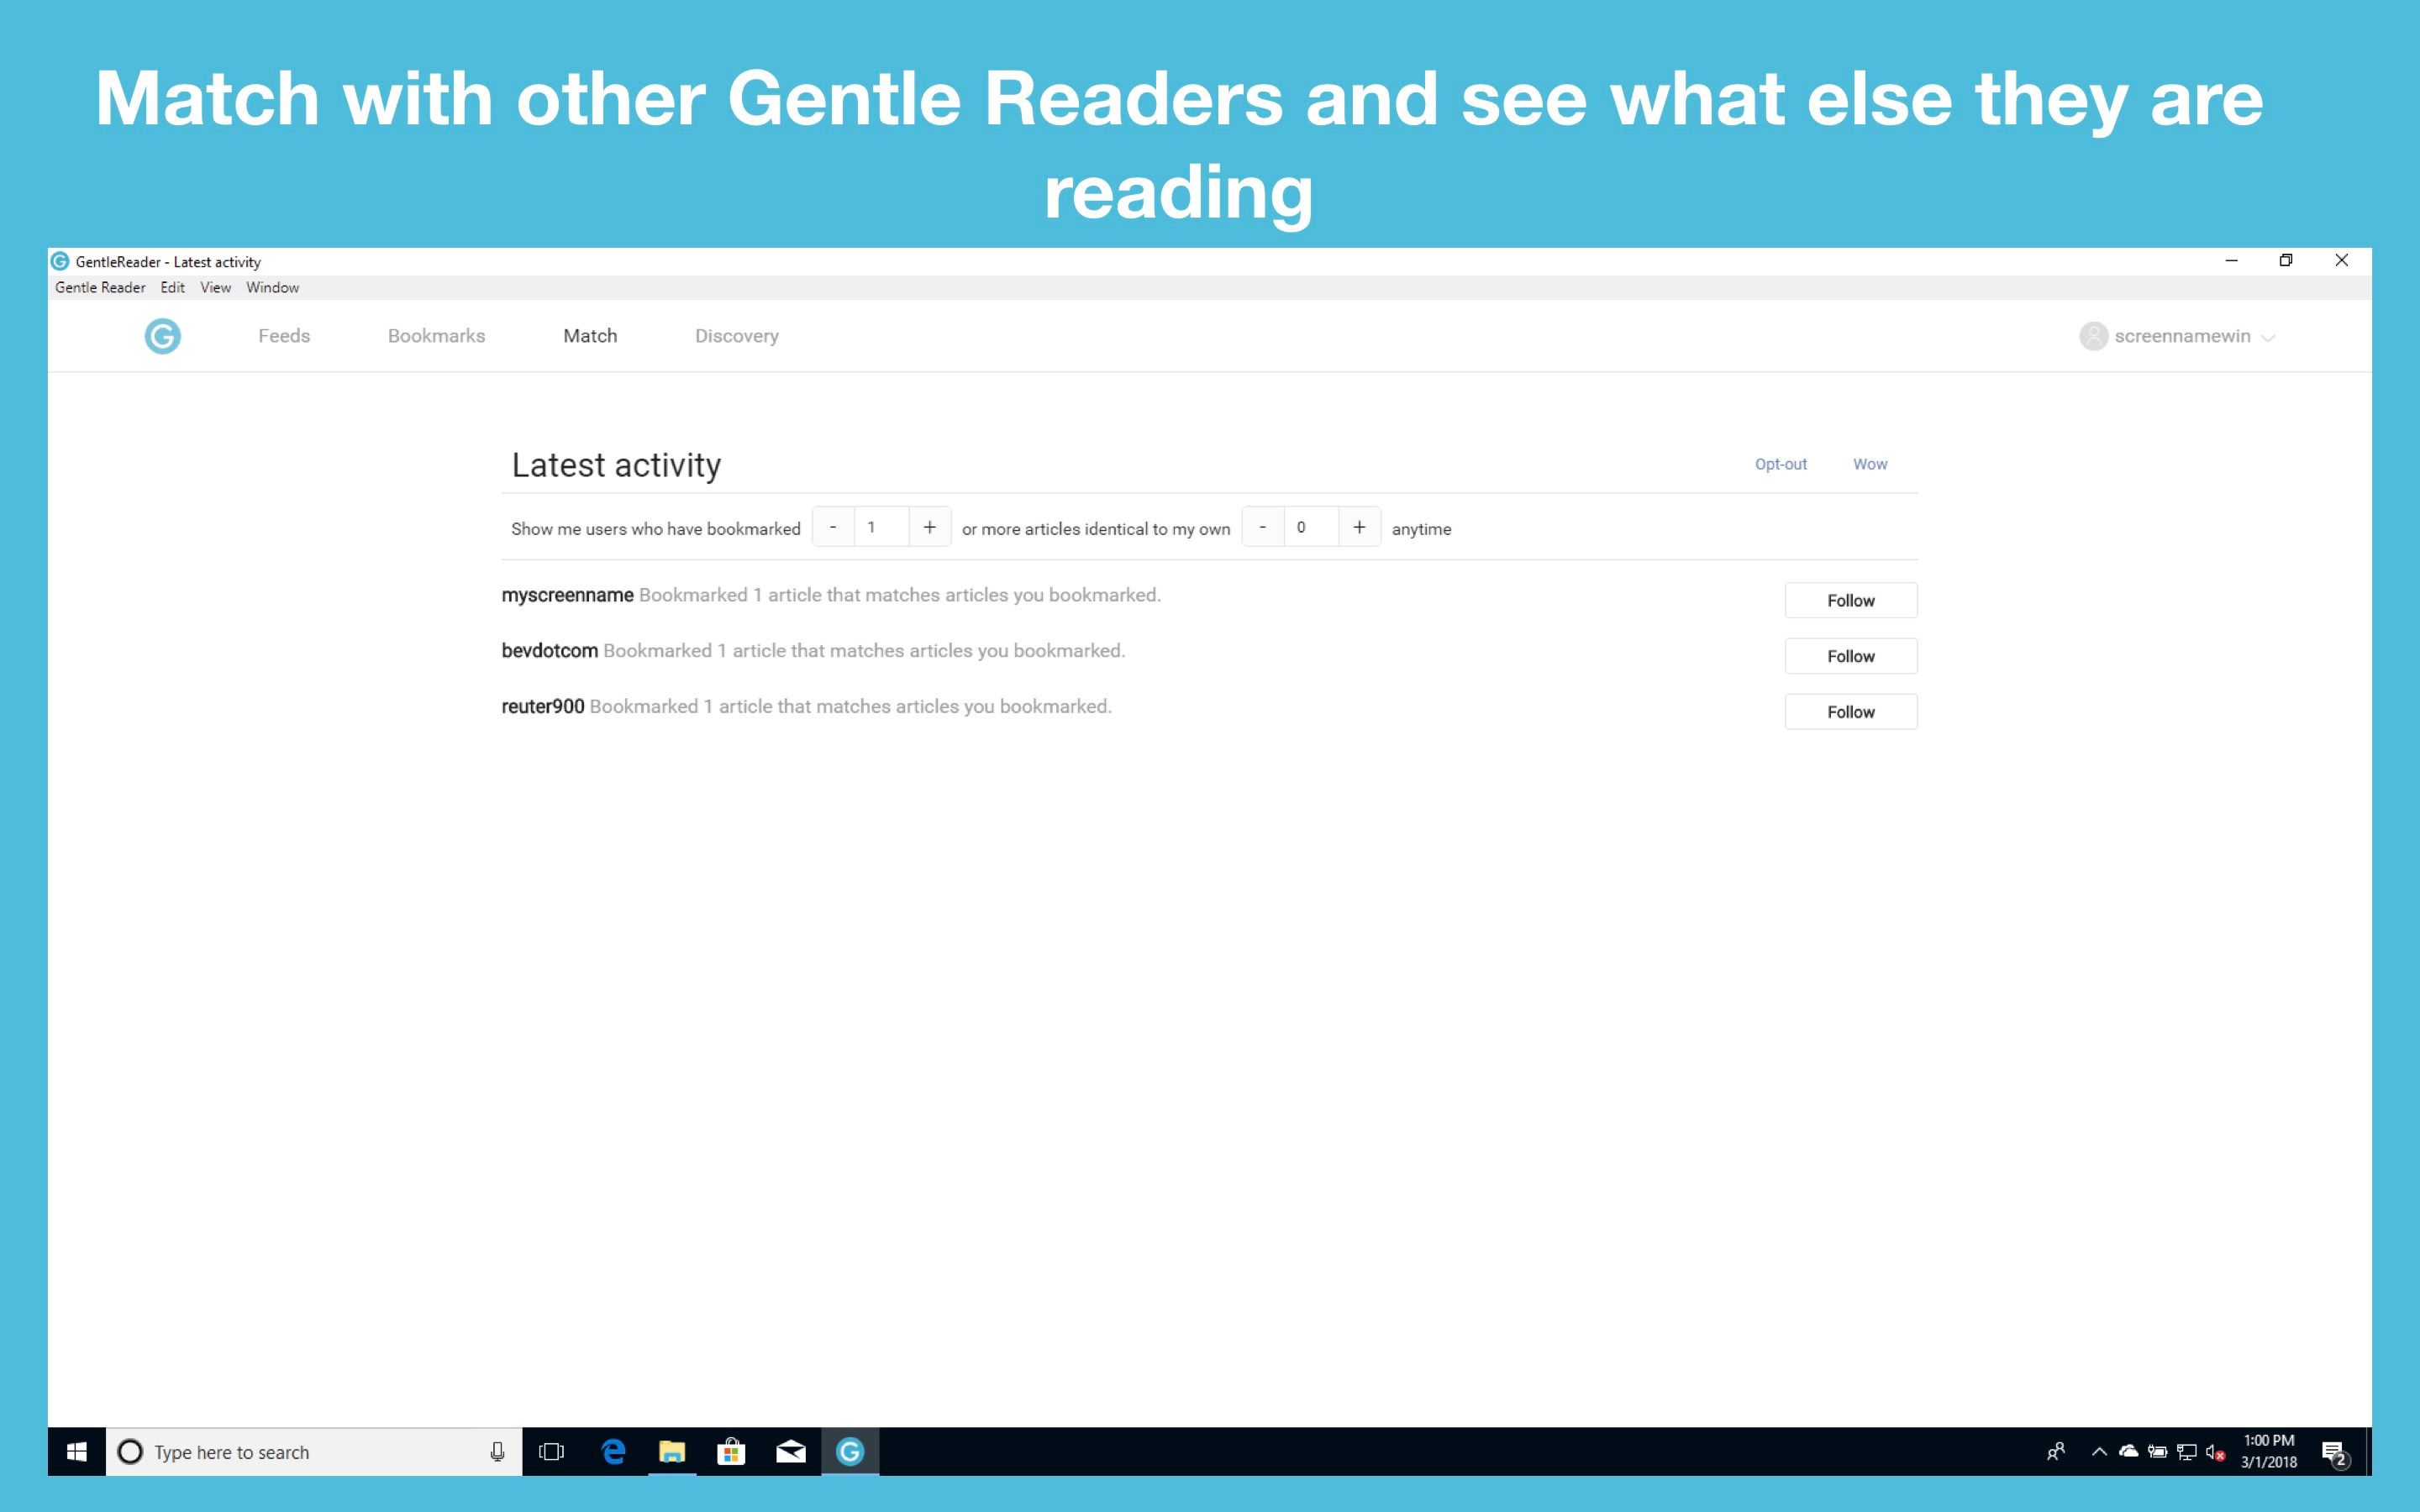 Match with other Gentle Readers and see what else they are reading